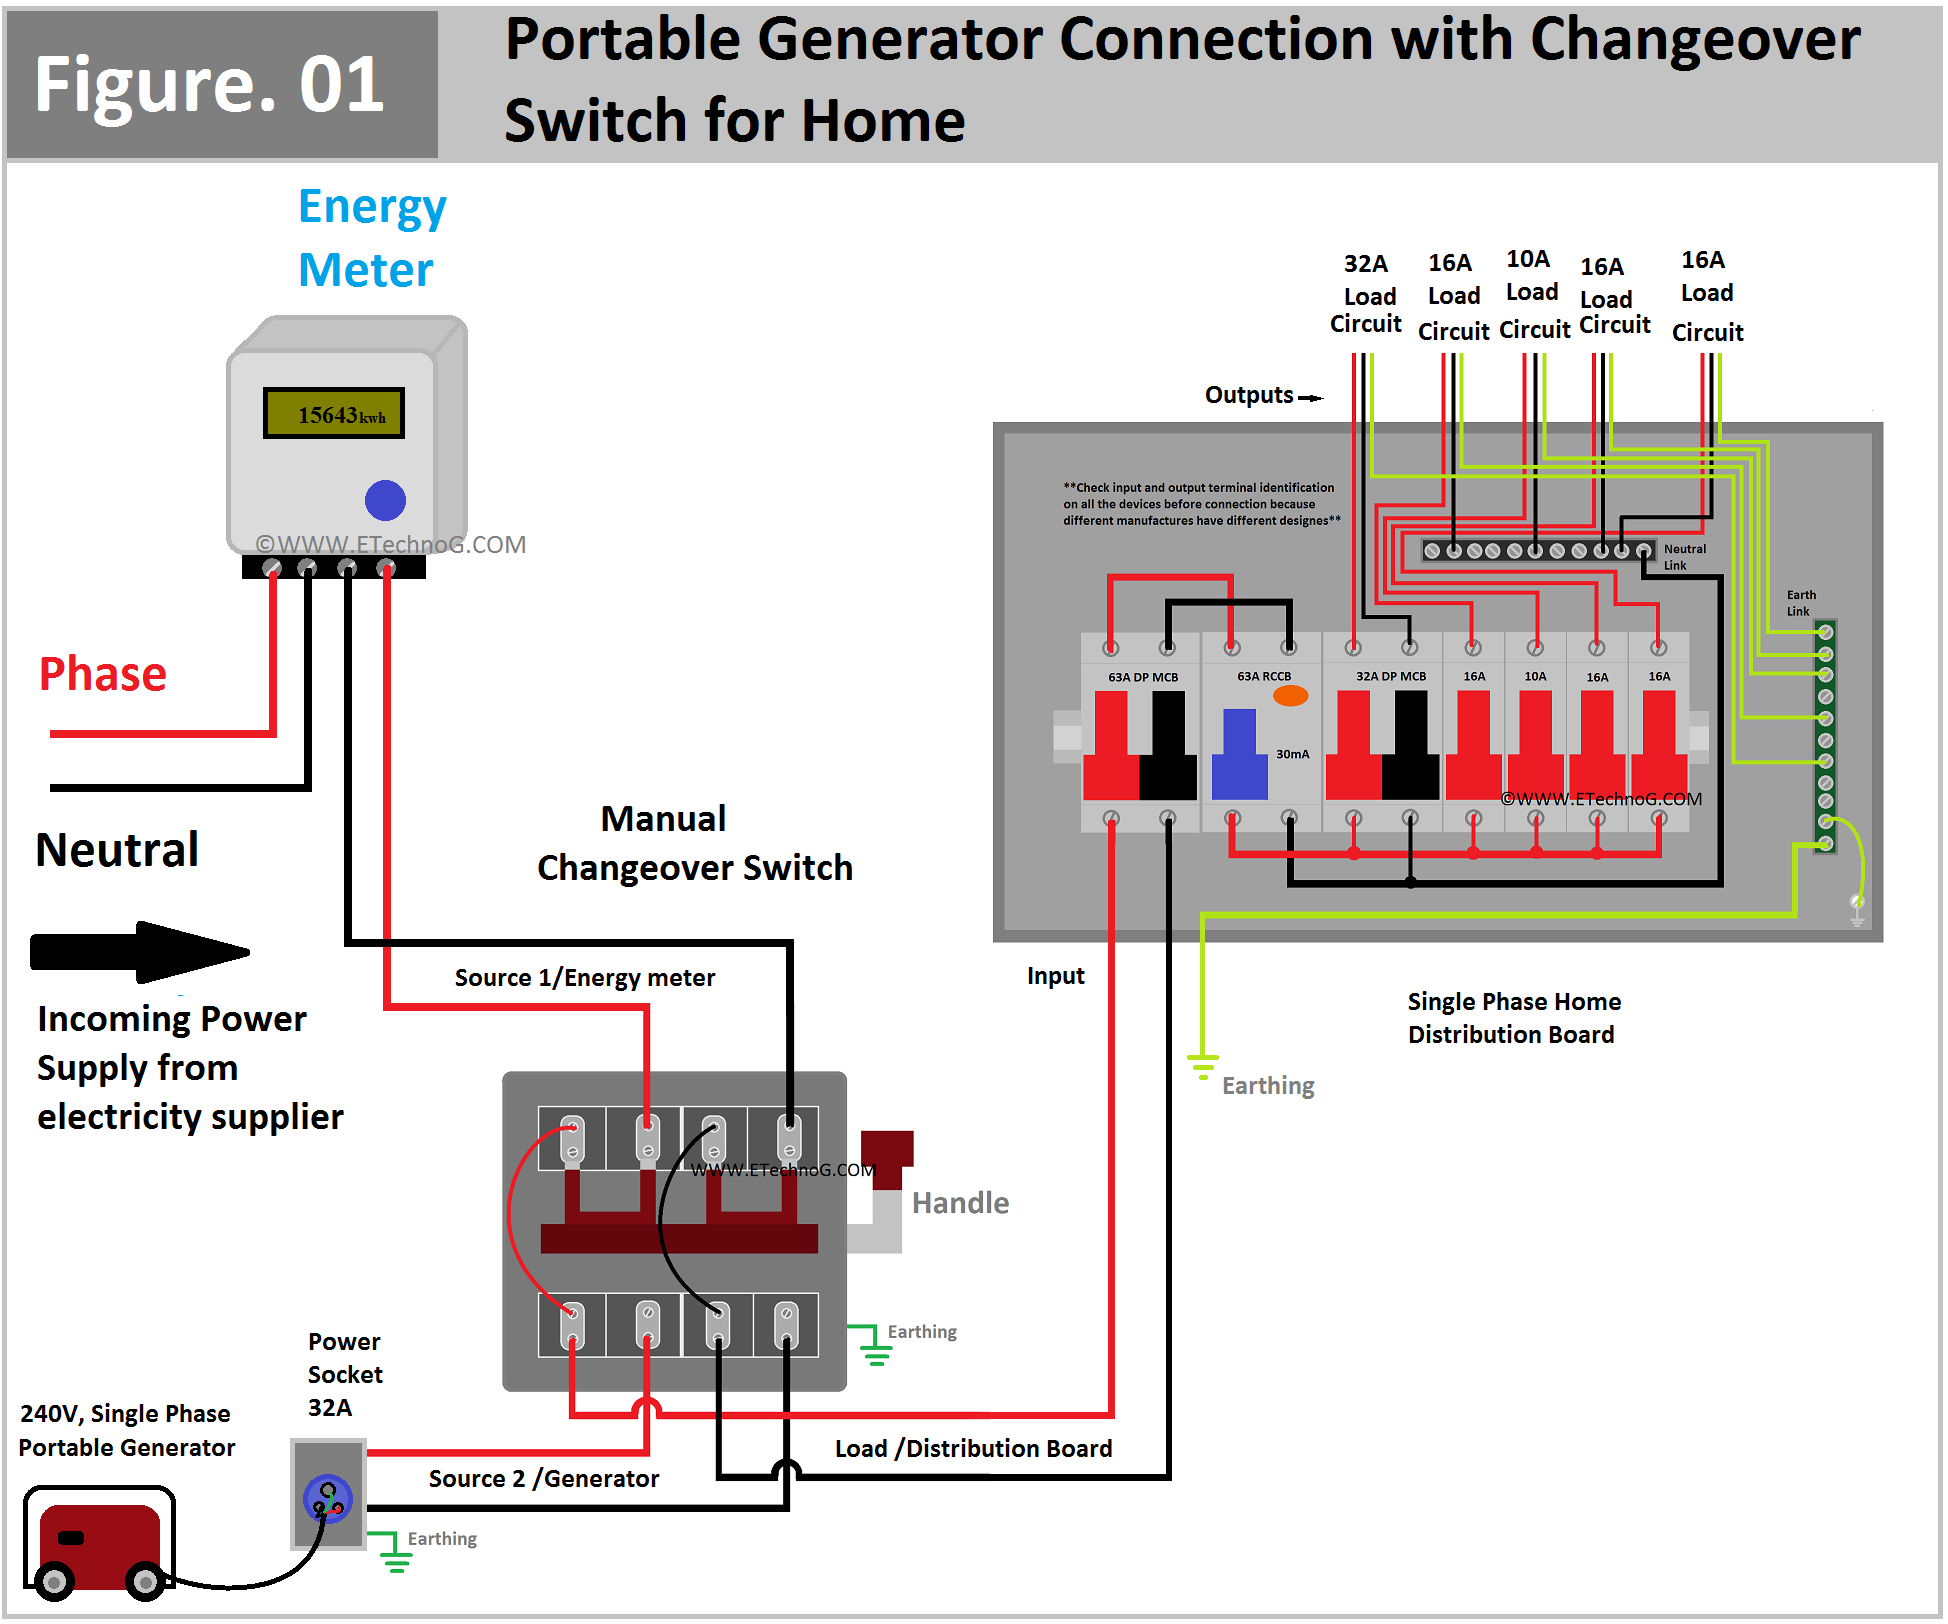 Portable Generator Connection with Changeover Switch for Home